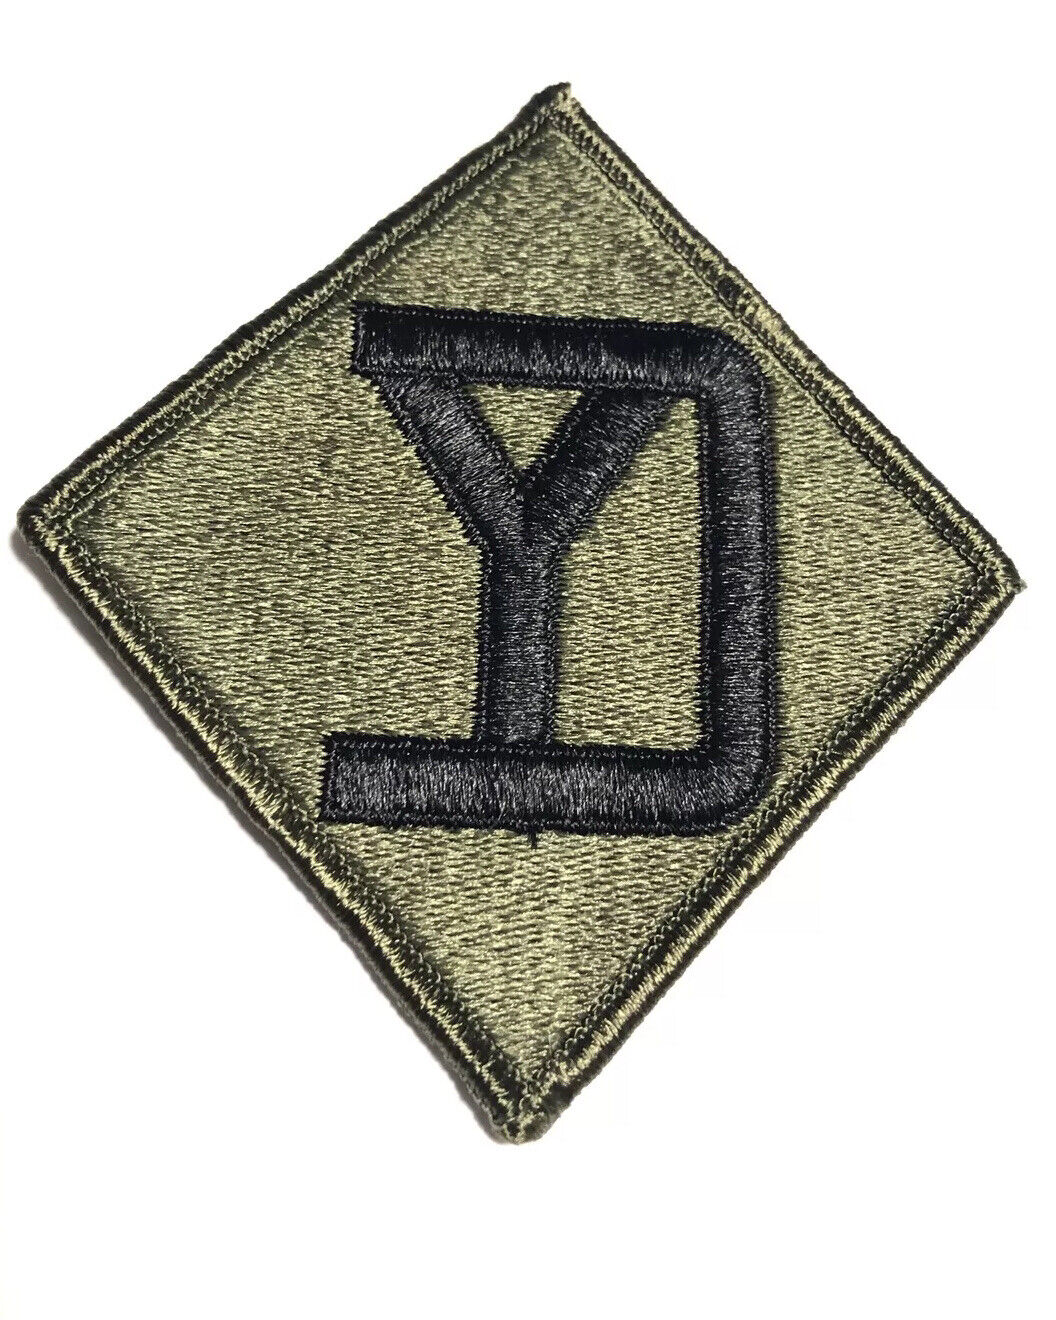 26th Infantry Division Subdued U.S. Army Shoulder Patch Insignia